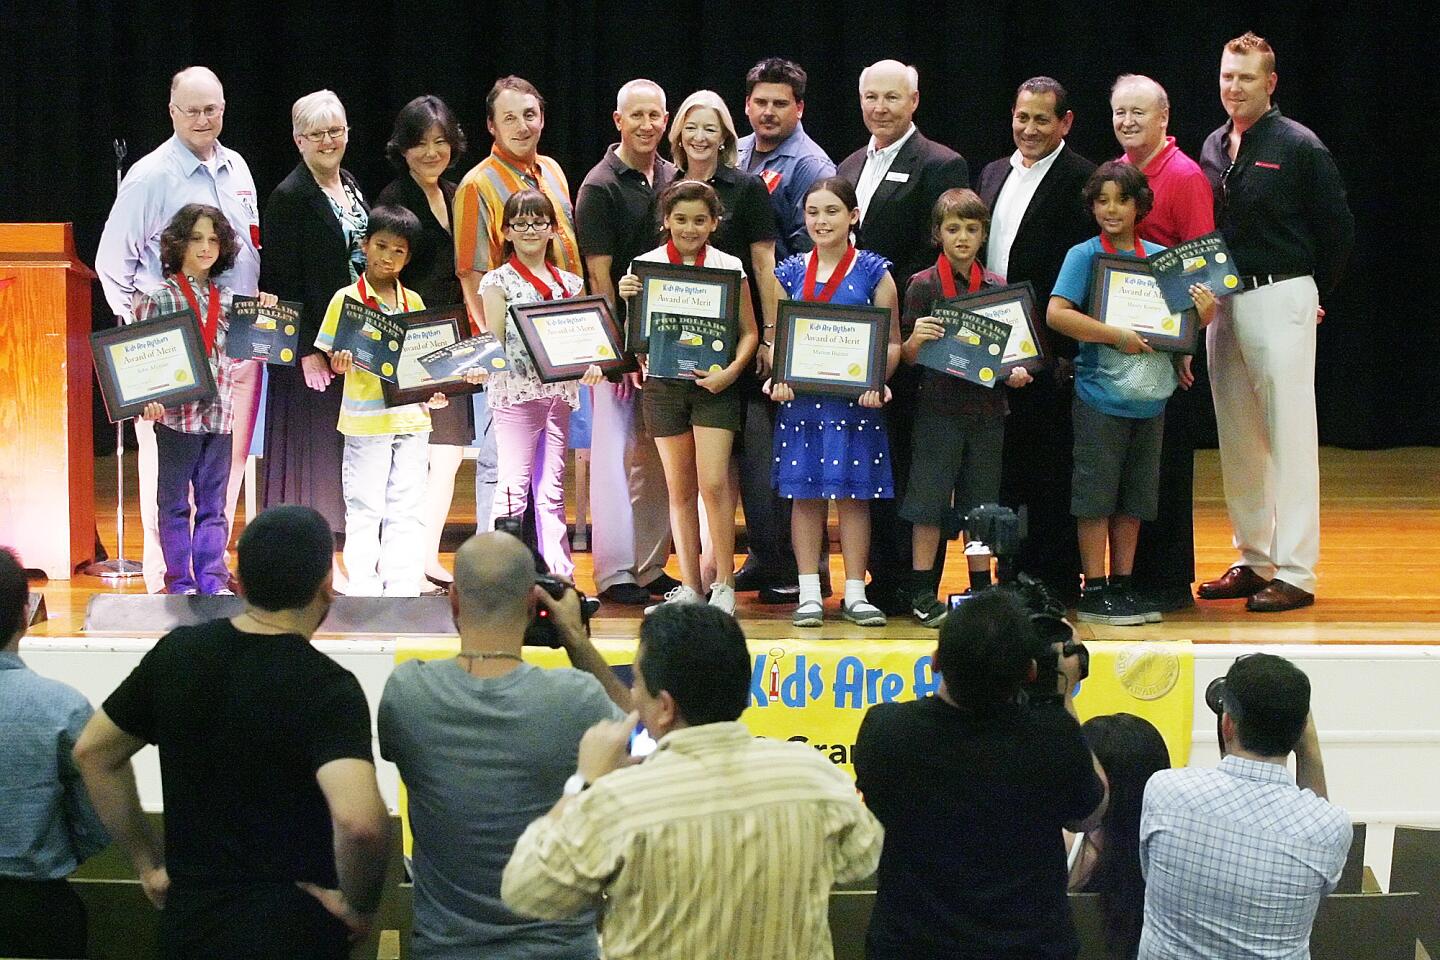 The seven third grade authors, of John Alajijian, Russell Uvas, Julia Guglielmo, Sara Cohen, Marion Hunter, Noel Pennington and Henry Keeney, stand with Scholastic Book Fairs representatives on stage for photos at McKinley Elementary School in Burbank on Thursday, September 20, 2012. Seven third grade students, with the help of a parent coordinator, wrote the book Two Dollars One Wallet which won the Scholastic Book Fairs Kids Are Authors 2012 National Fiction Grand Prize Award.